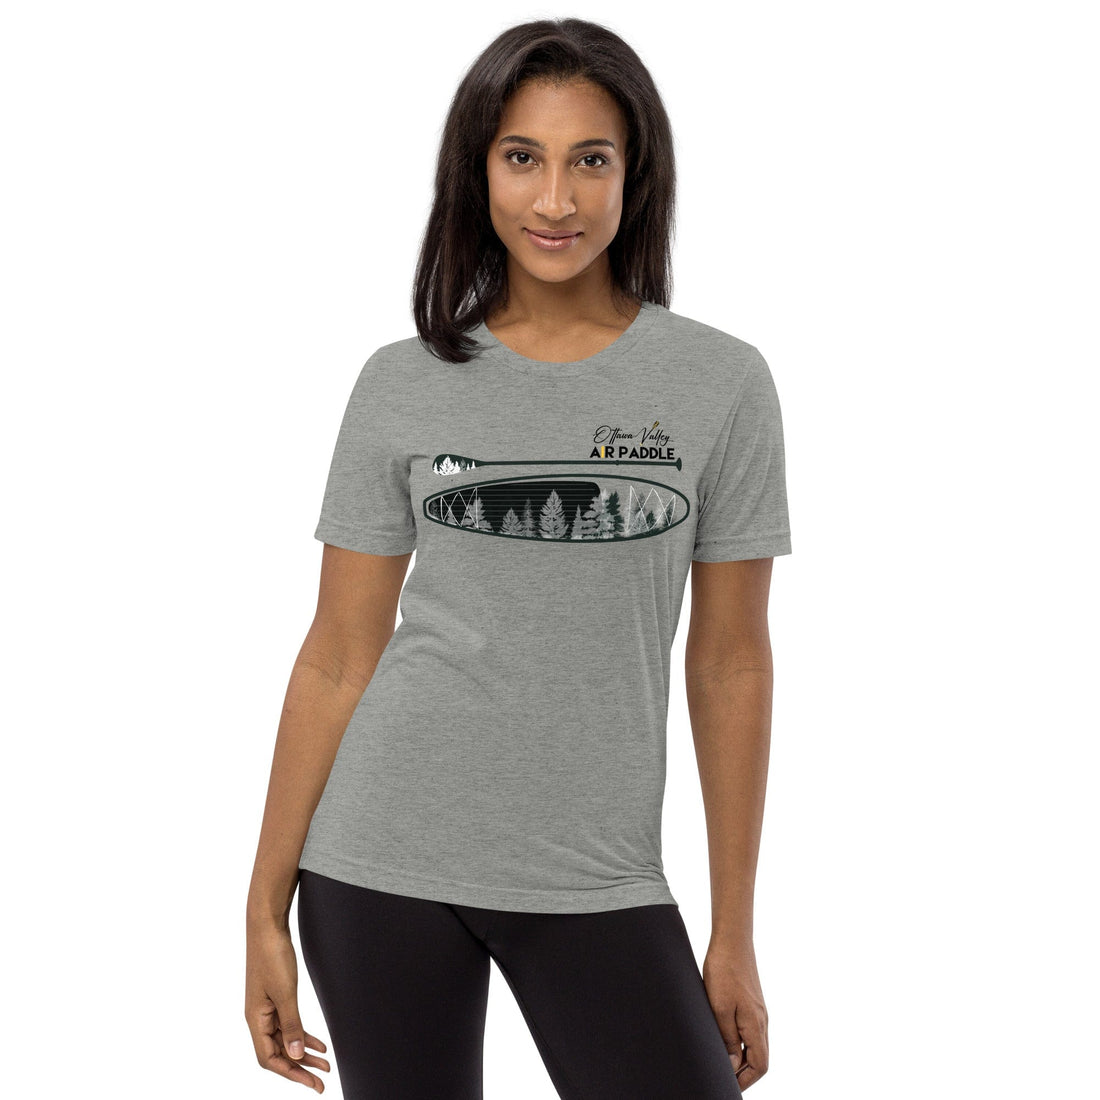 Ottawa Valley Air Paddle Athletic Grey Triblend / XS Forest Paddle Unisex Short Sleeve T-Shirt